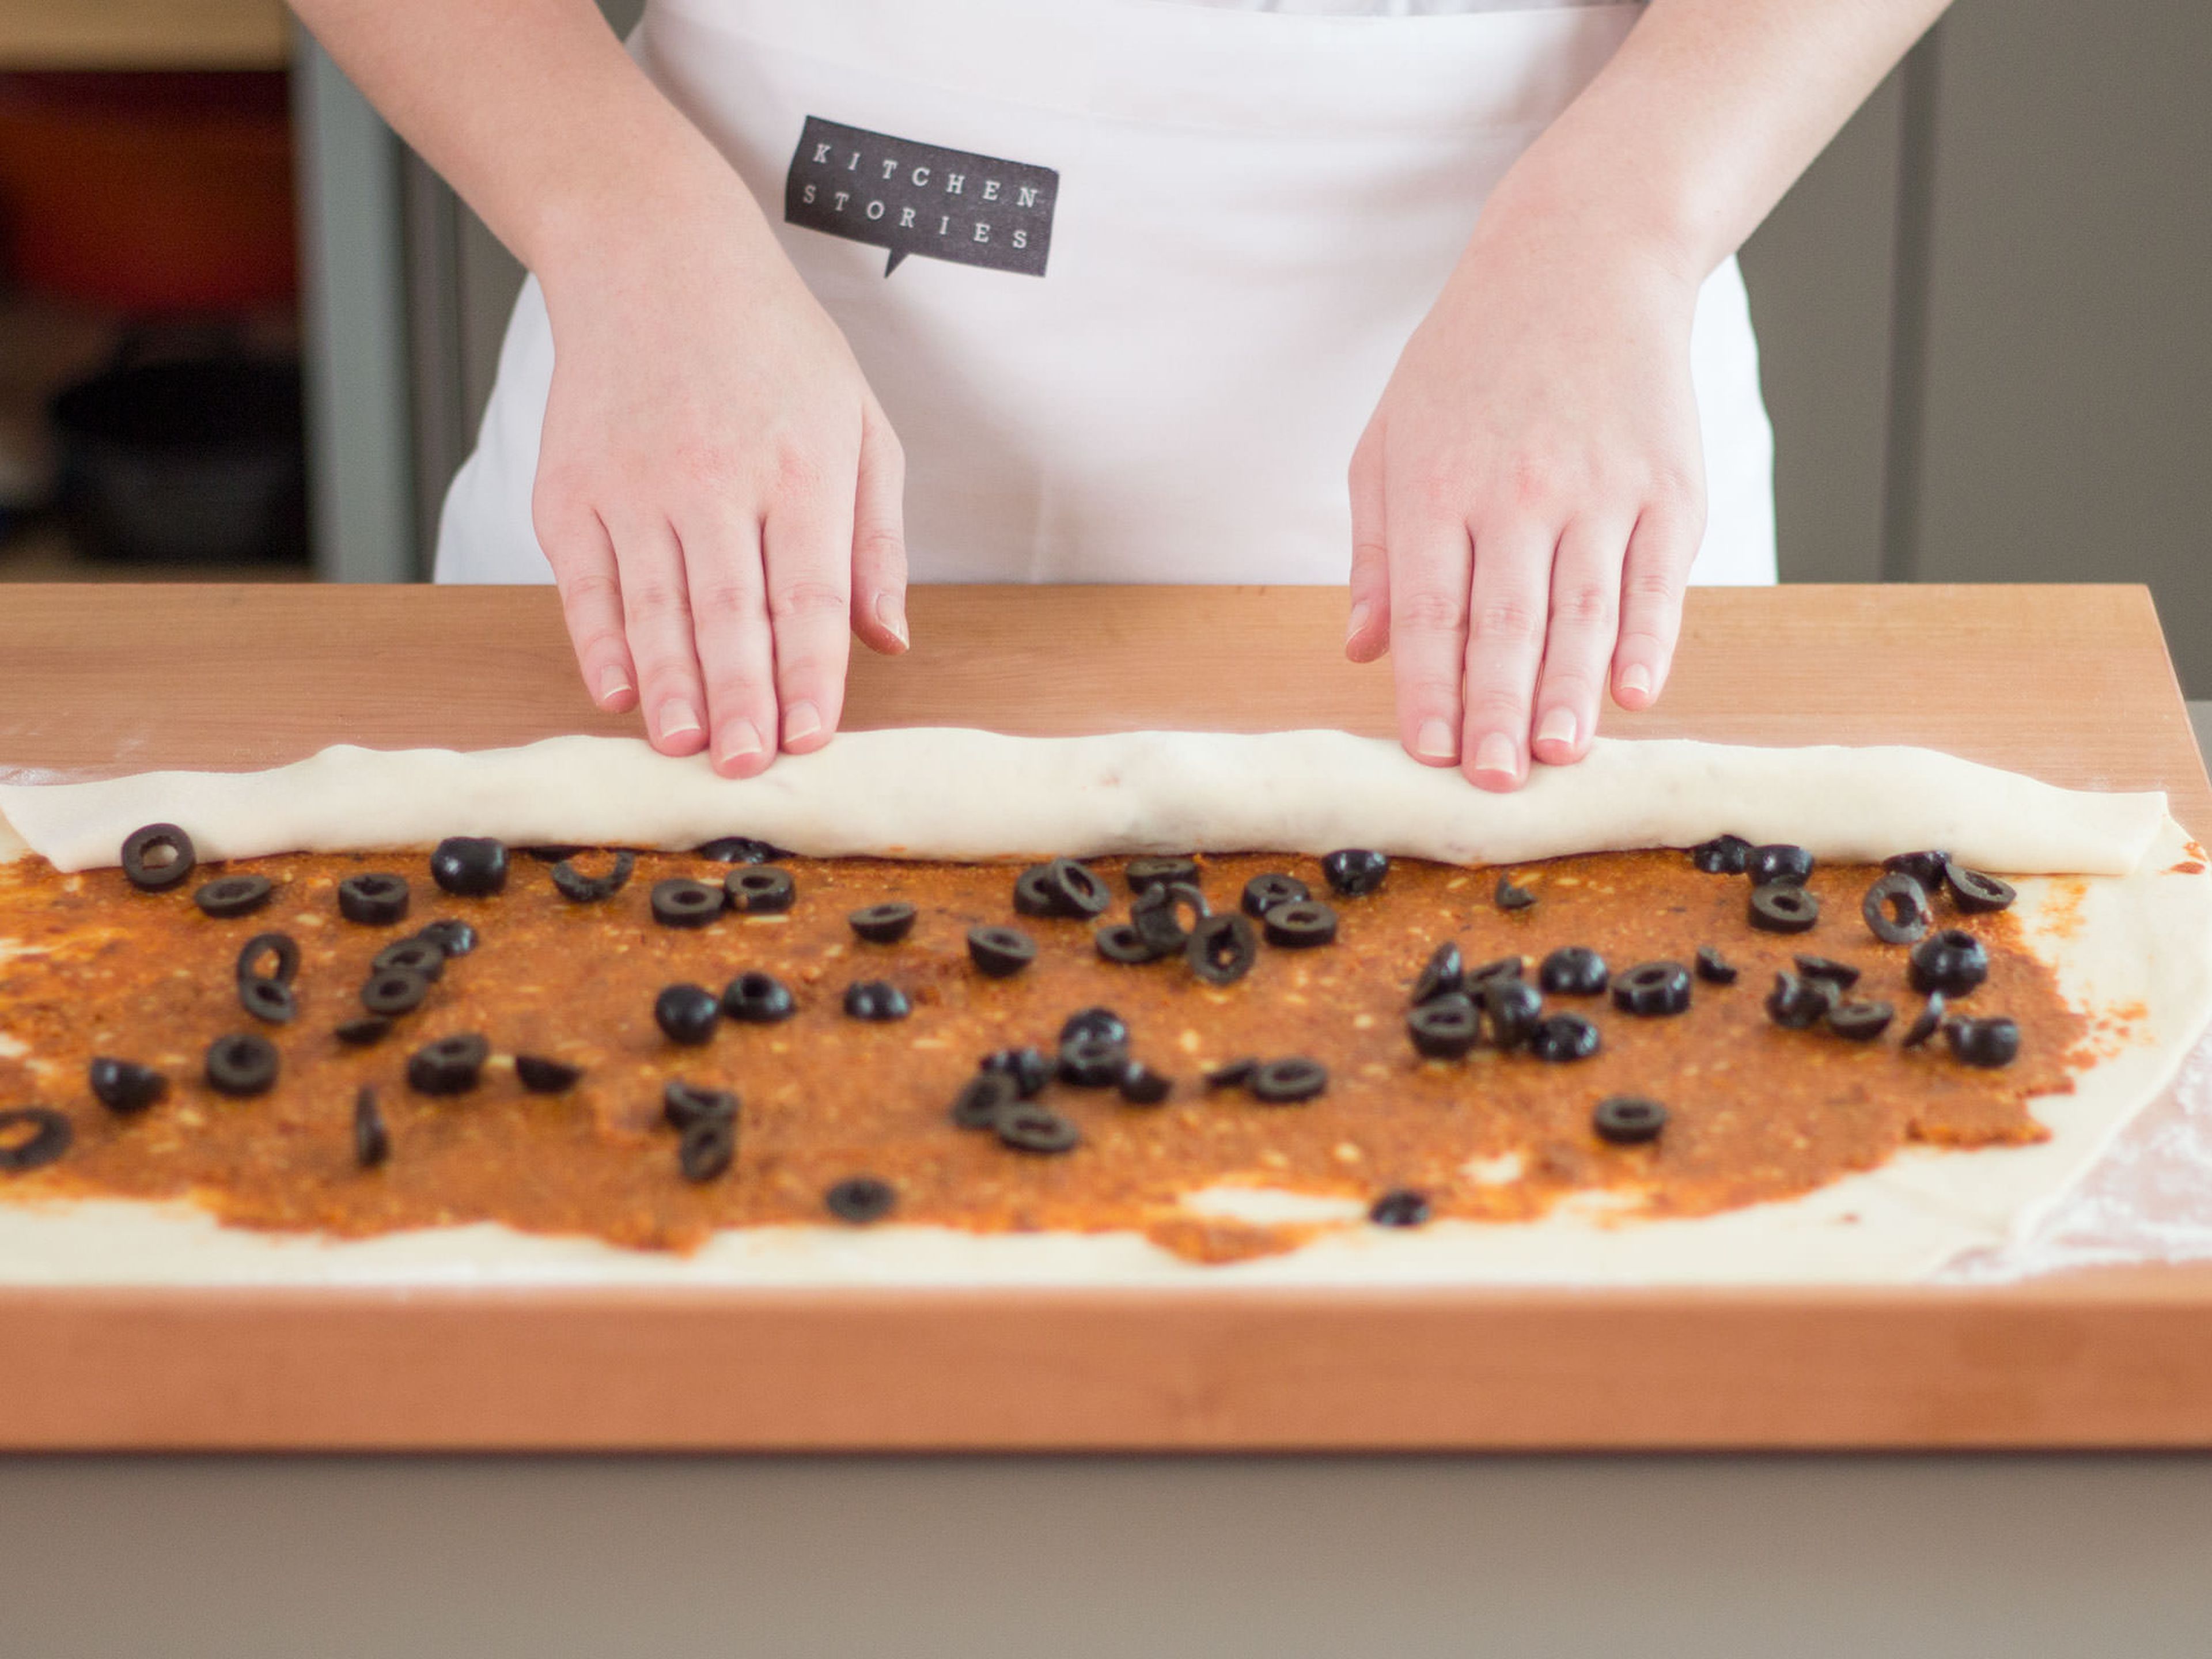 On a lightly floured work surface, flatten out dough with a rolling pin into a large rectangle. Evenly spread sun dried tomato paste over dough and sprinkle olives on top. Then, roll dough from side to side to form a long log.